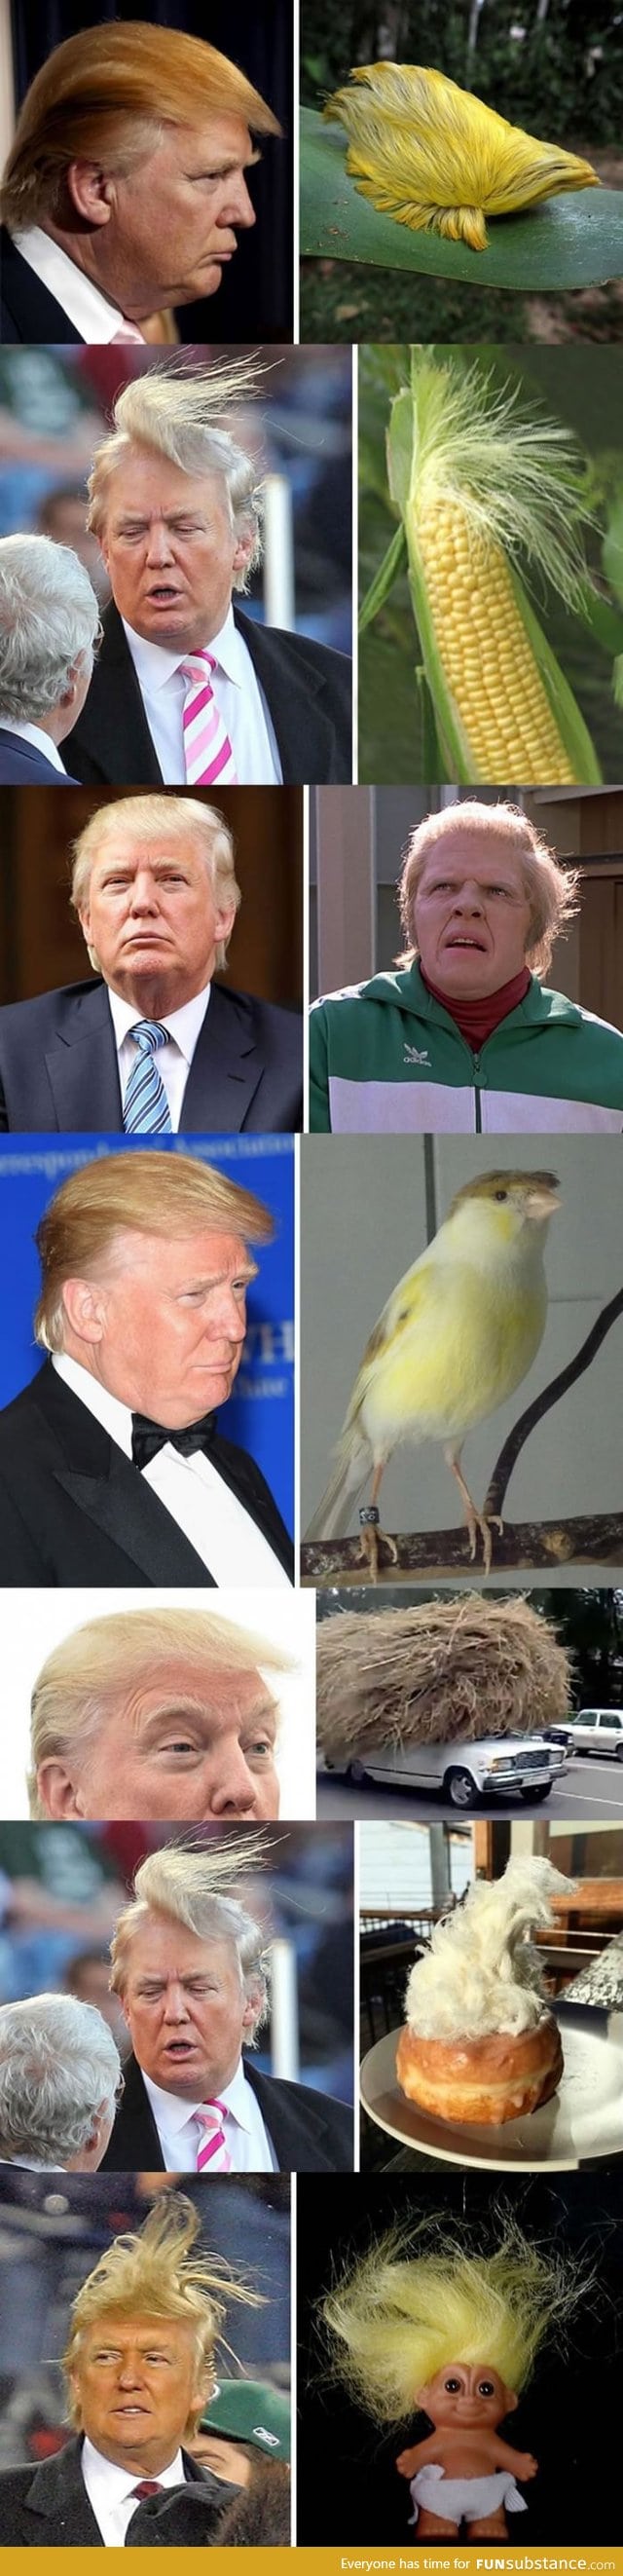 Things that look like Donald Trump